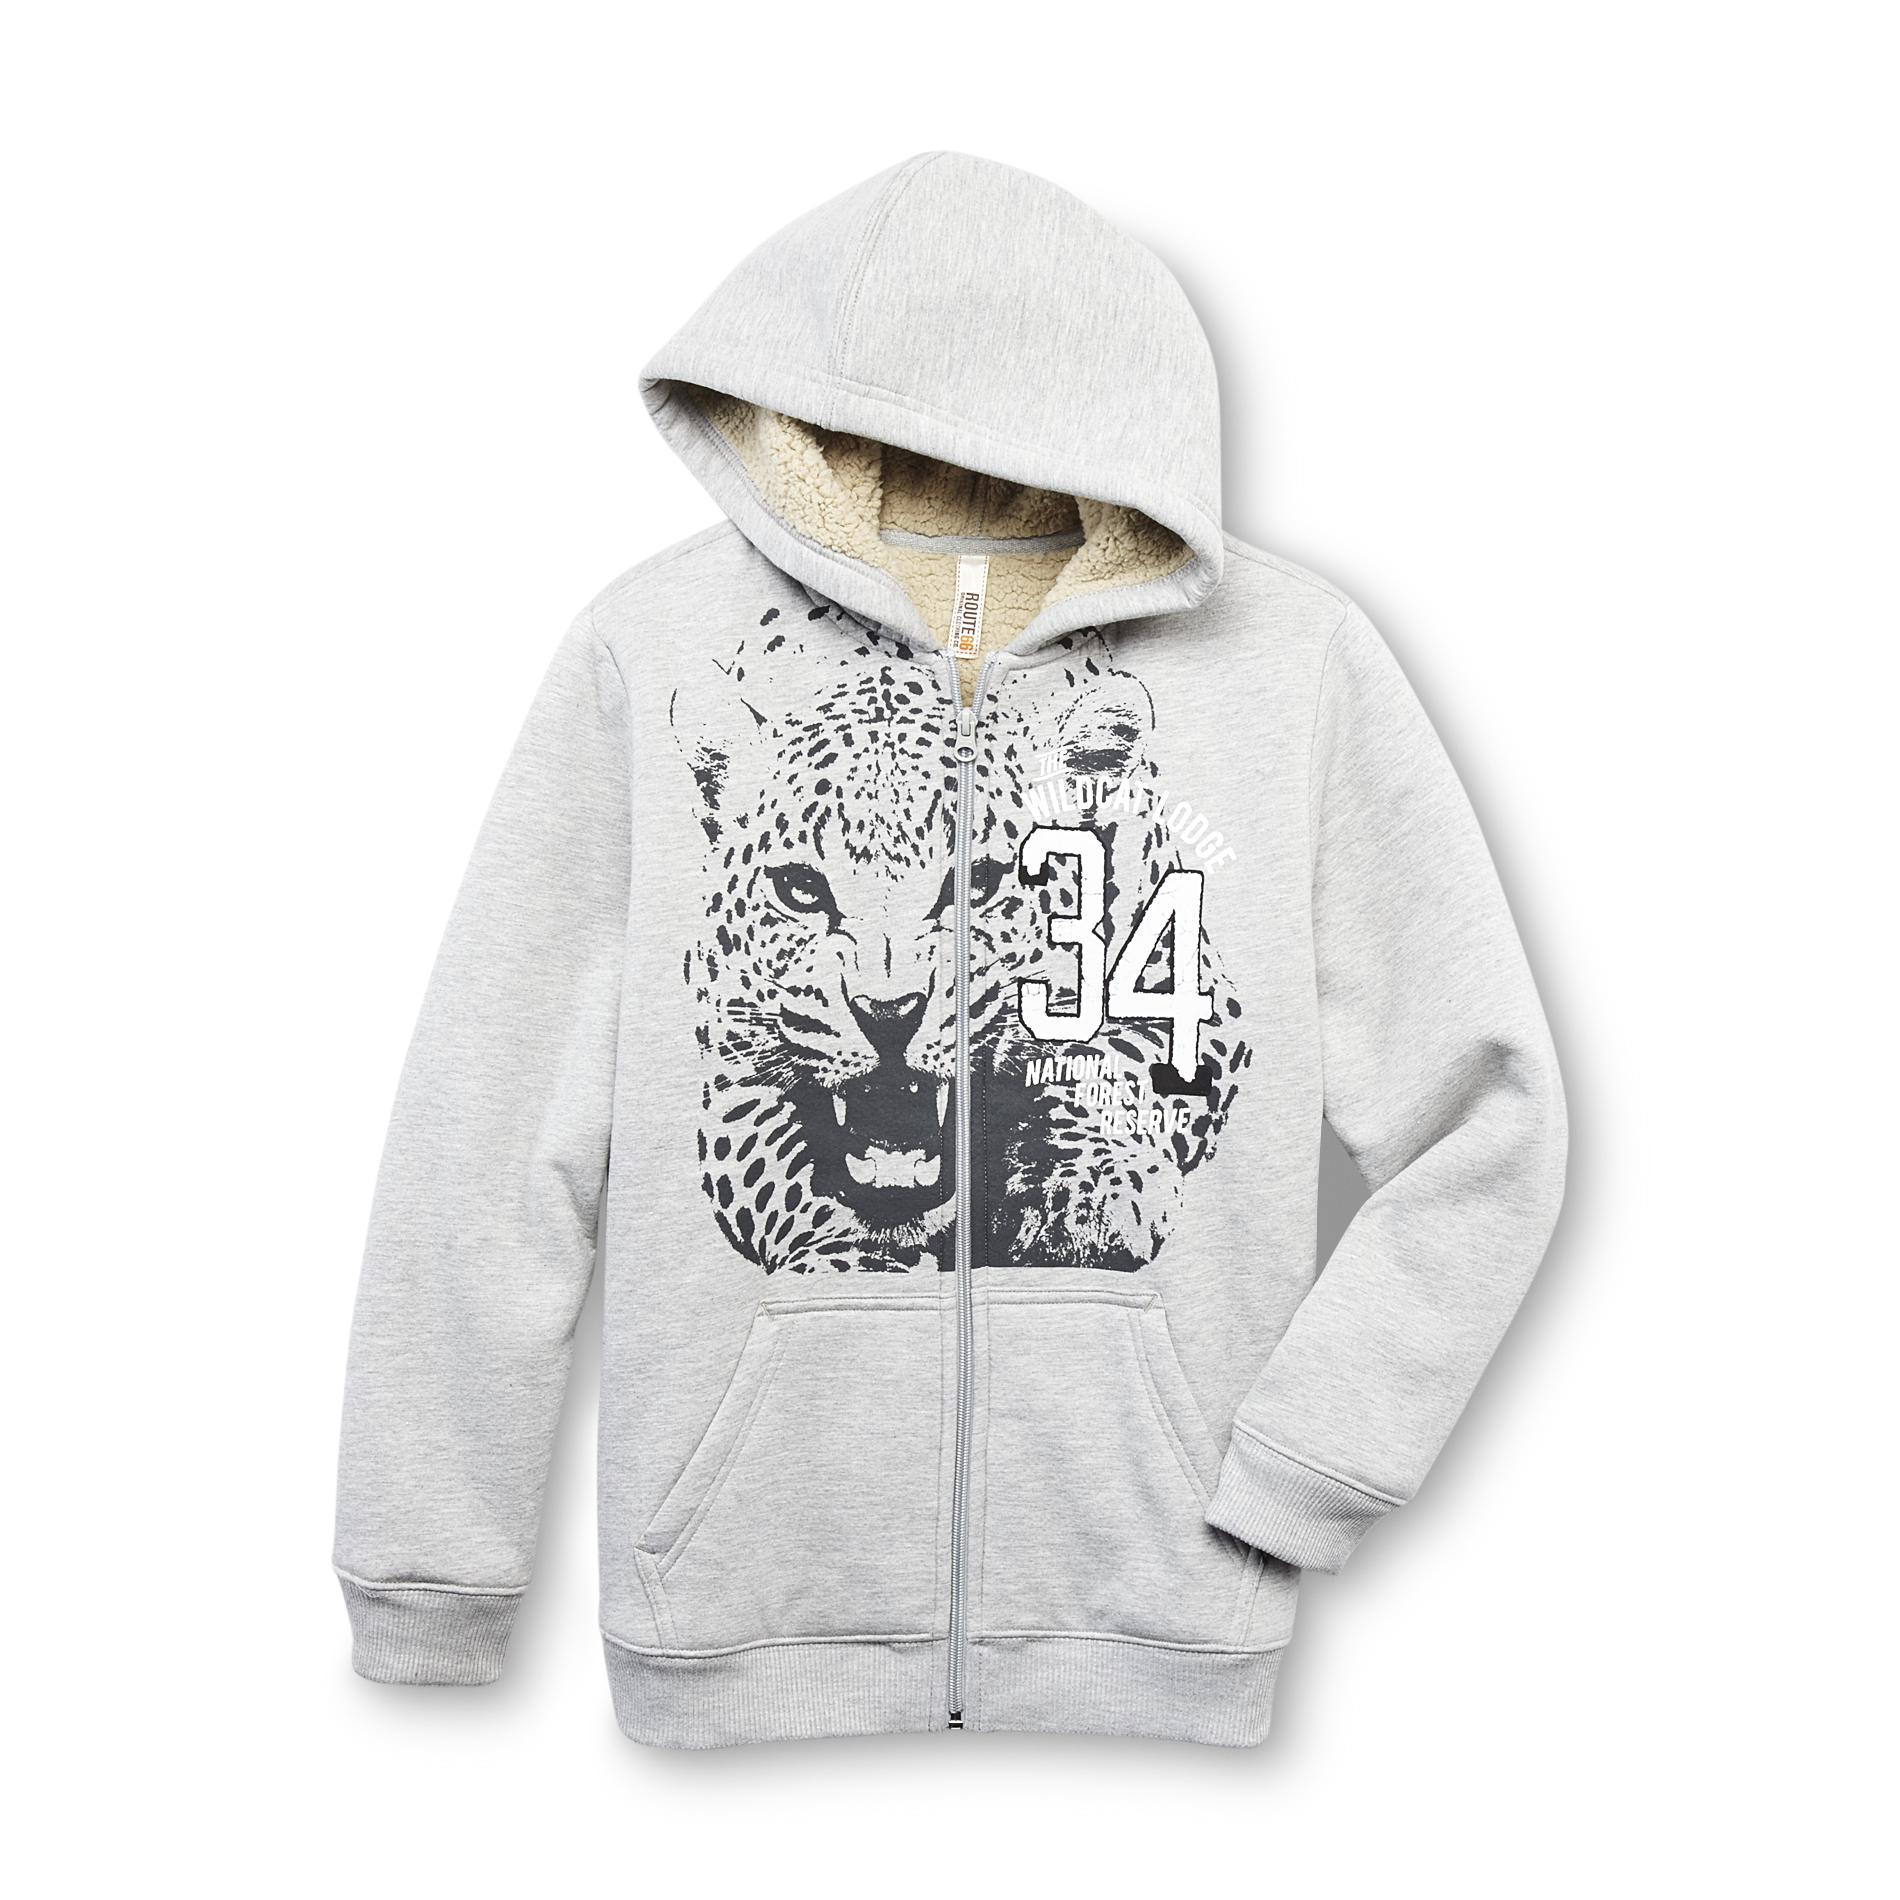 Route 66 Boy's Graphic Hoodie Jacket - National Forest Reserve